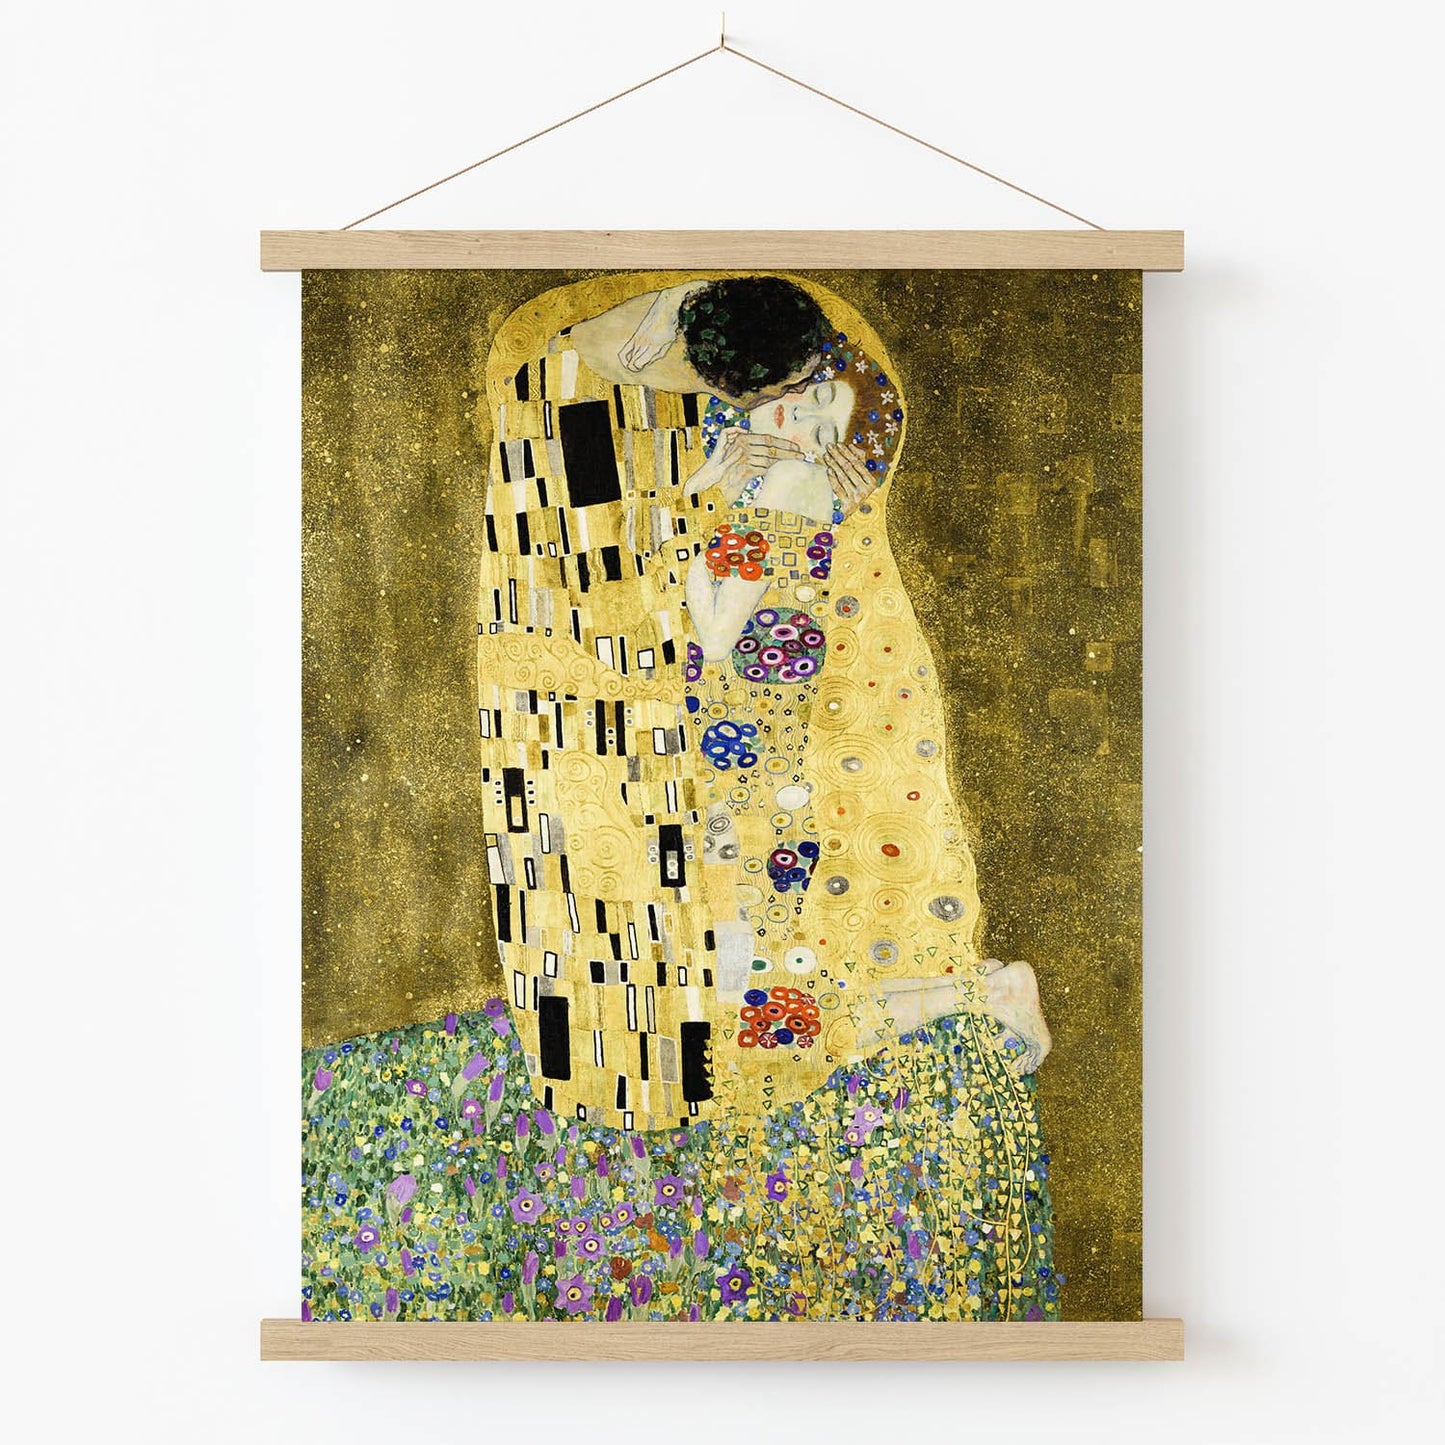 Two Lovers Embracing in a Kiss Wearing Gold Robes Art Print in Wood Hanger Frame on Wall